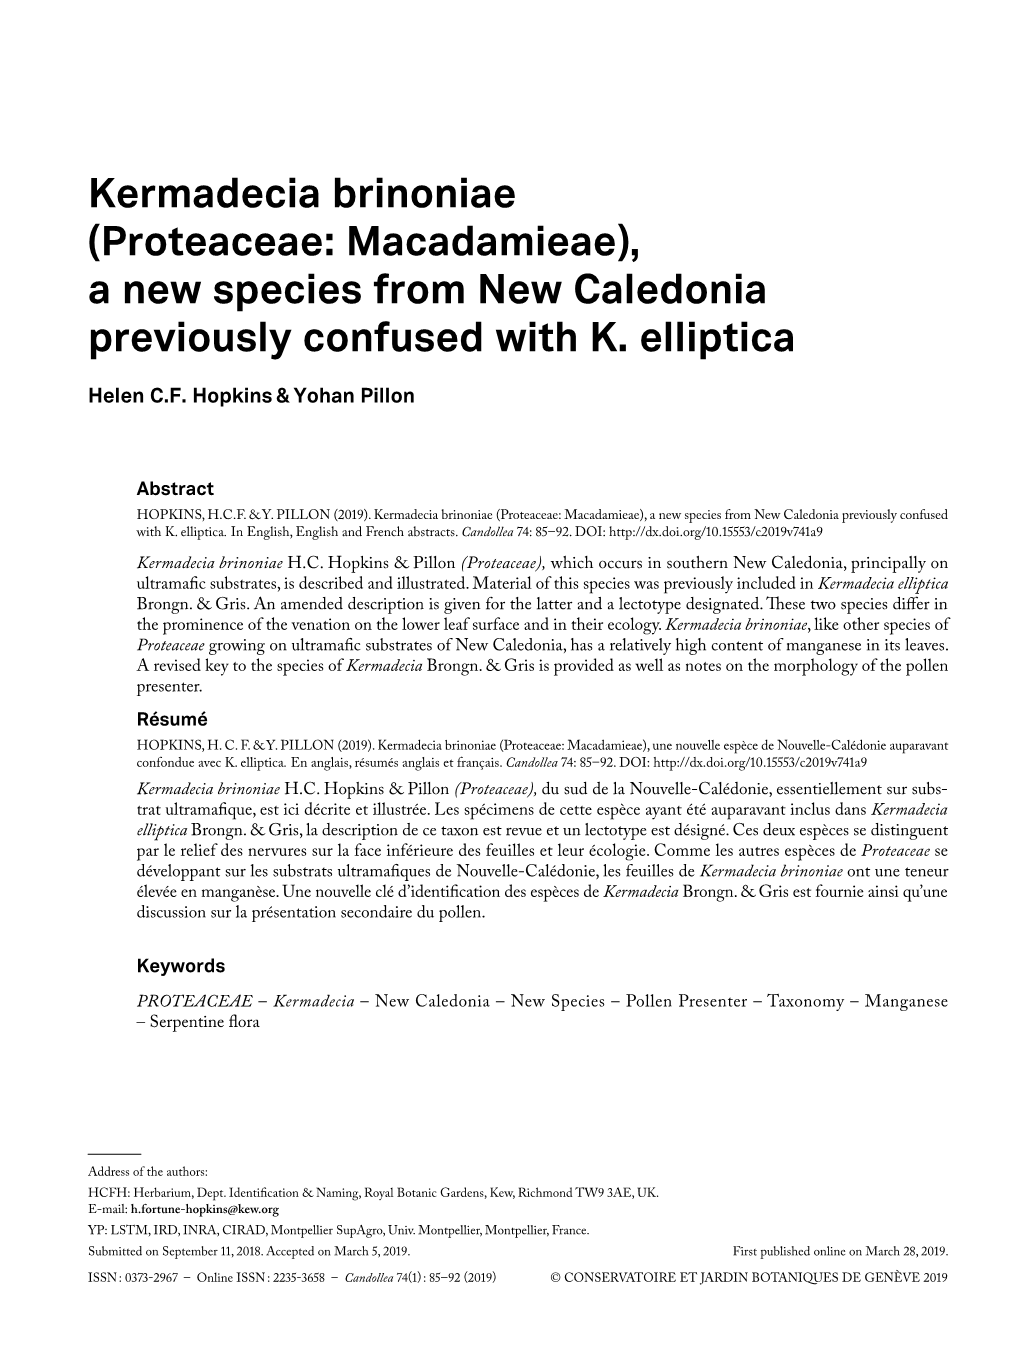 Kermadecia Brinoniae (Proteaceae: Macadamieae), a New Species from New Caledonia Previously Confused with K